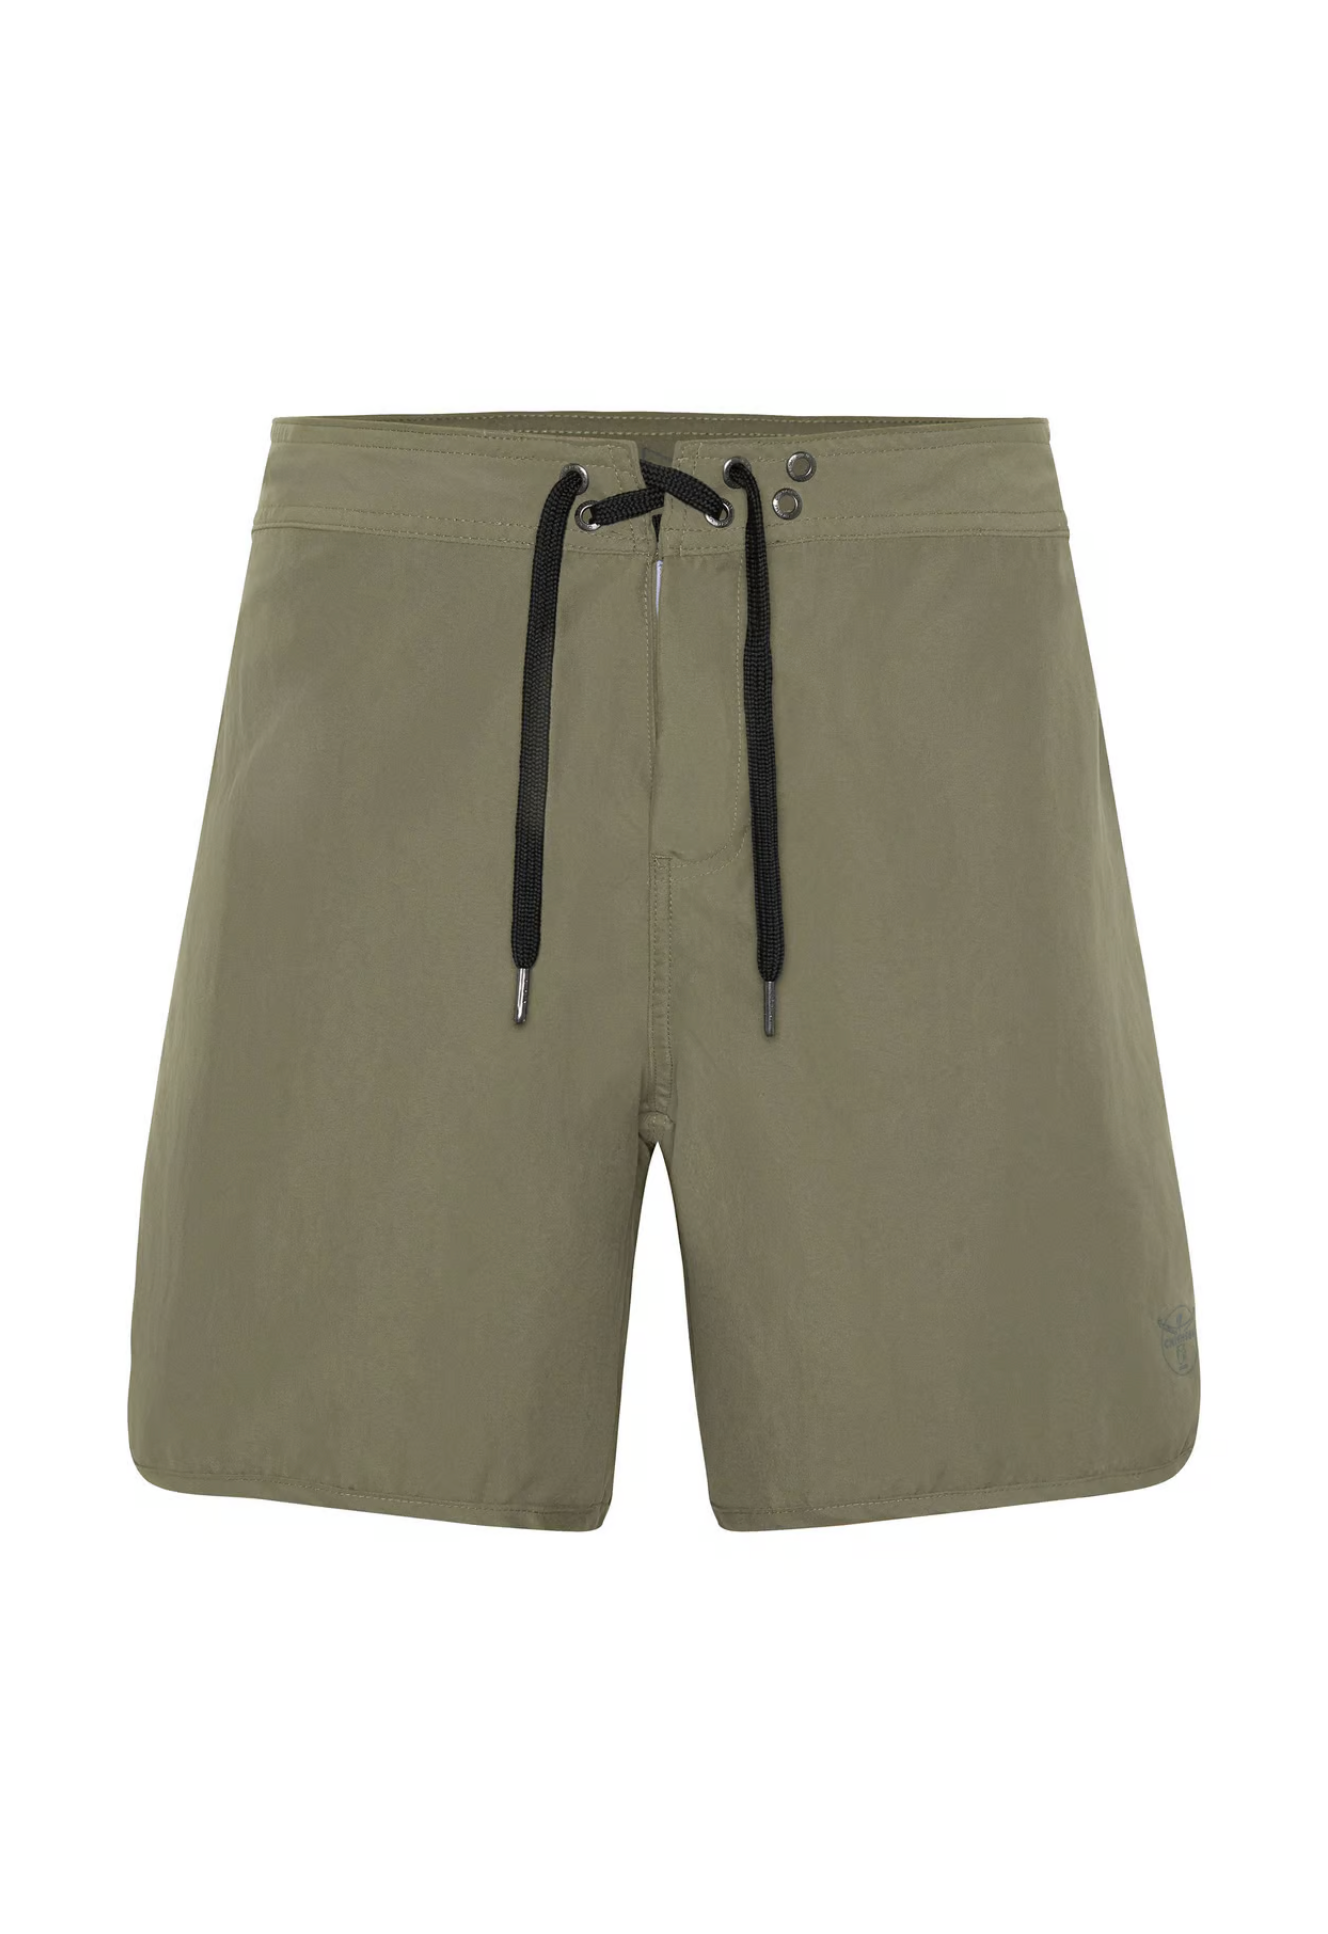 MBRC x Chiemsee Swimshorts